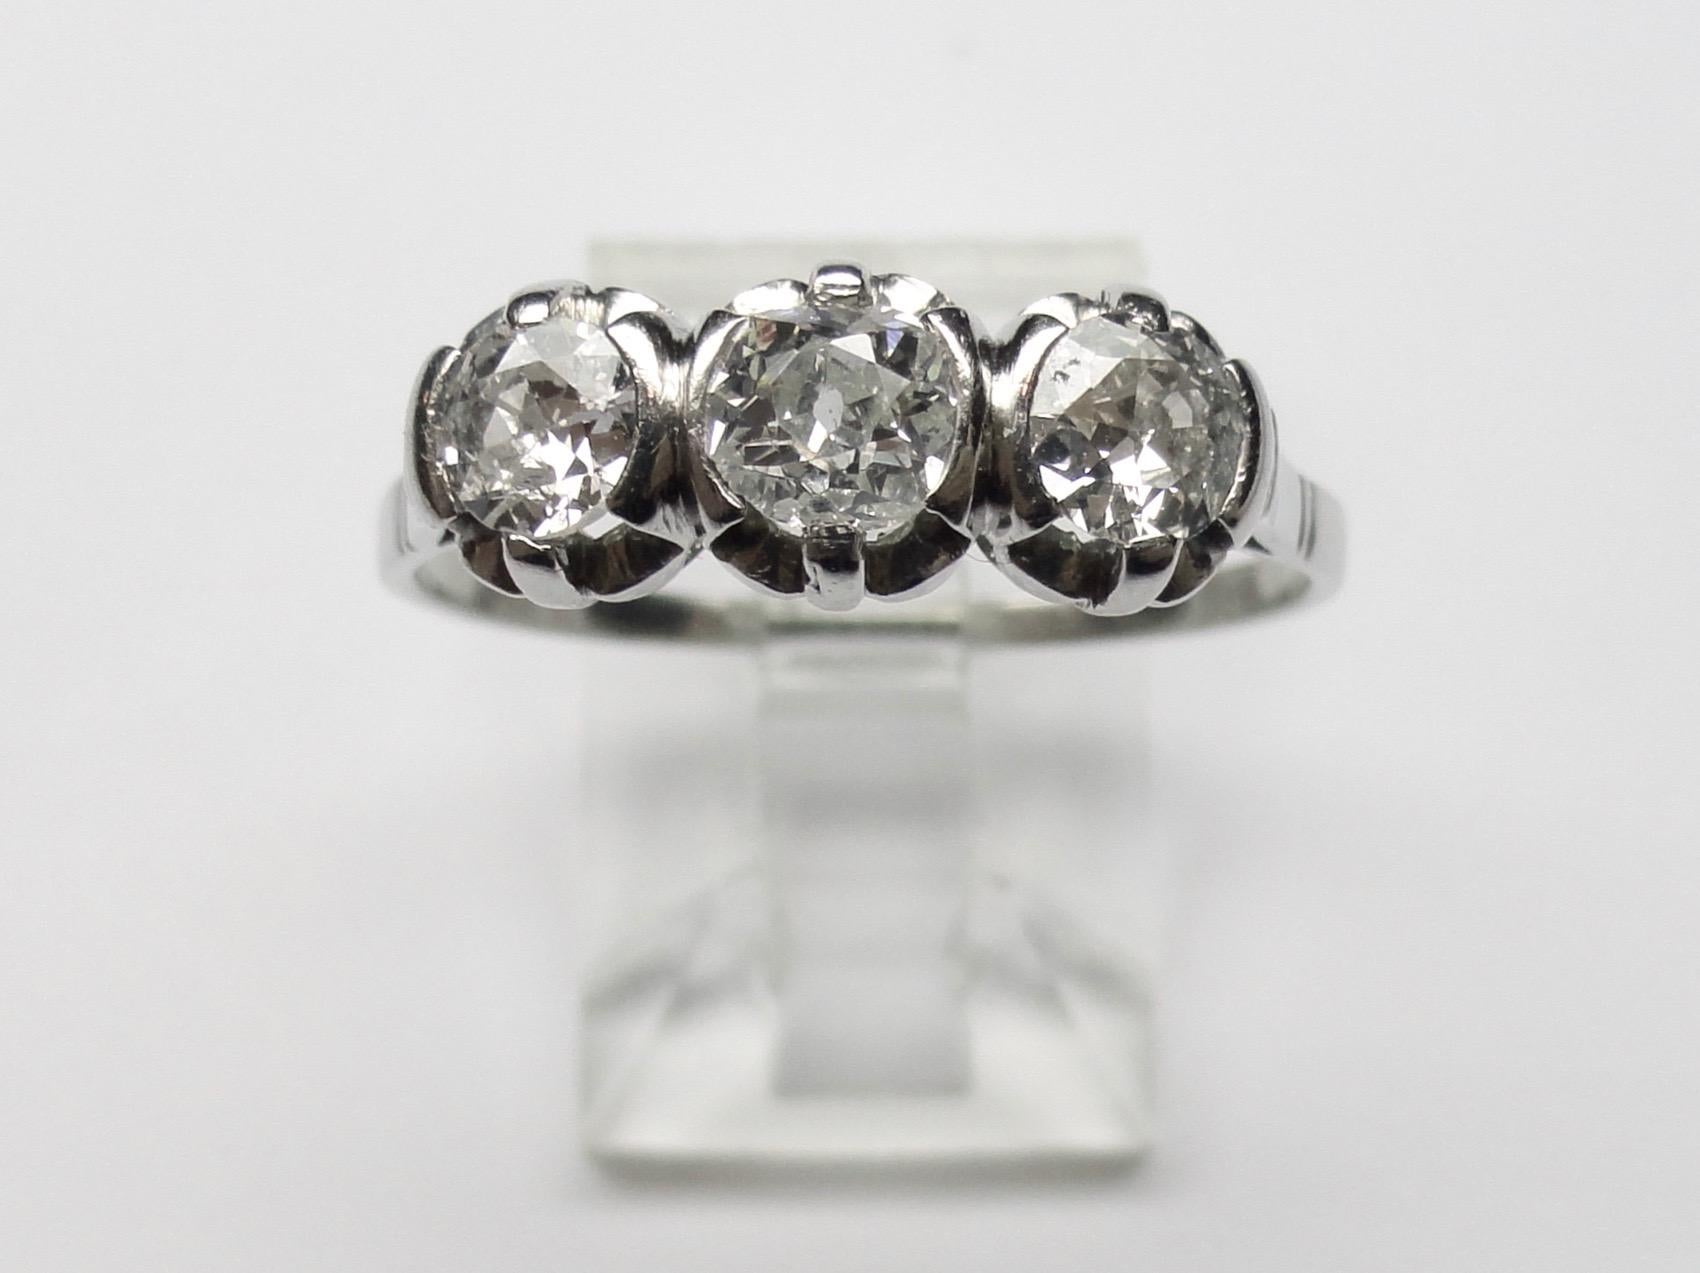 Classic trilogy ring with central cushion cut diamond and 2 Old Euro cut diamonds on the sides, estimated 0.80ct total. Set in platinum from the 1940's. 
